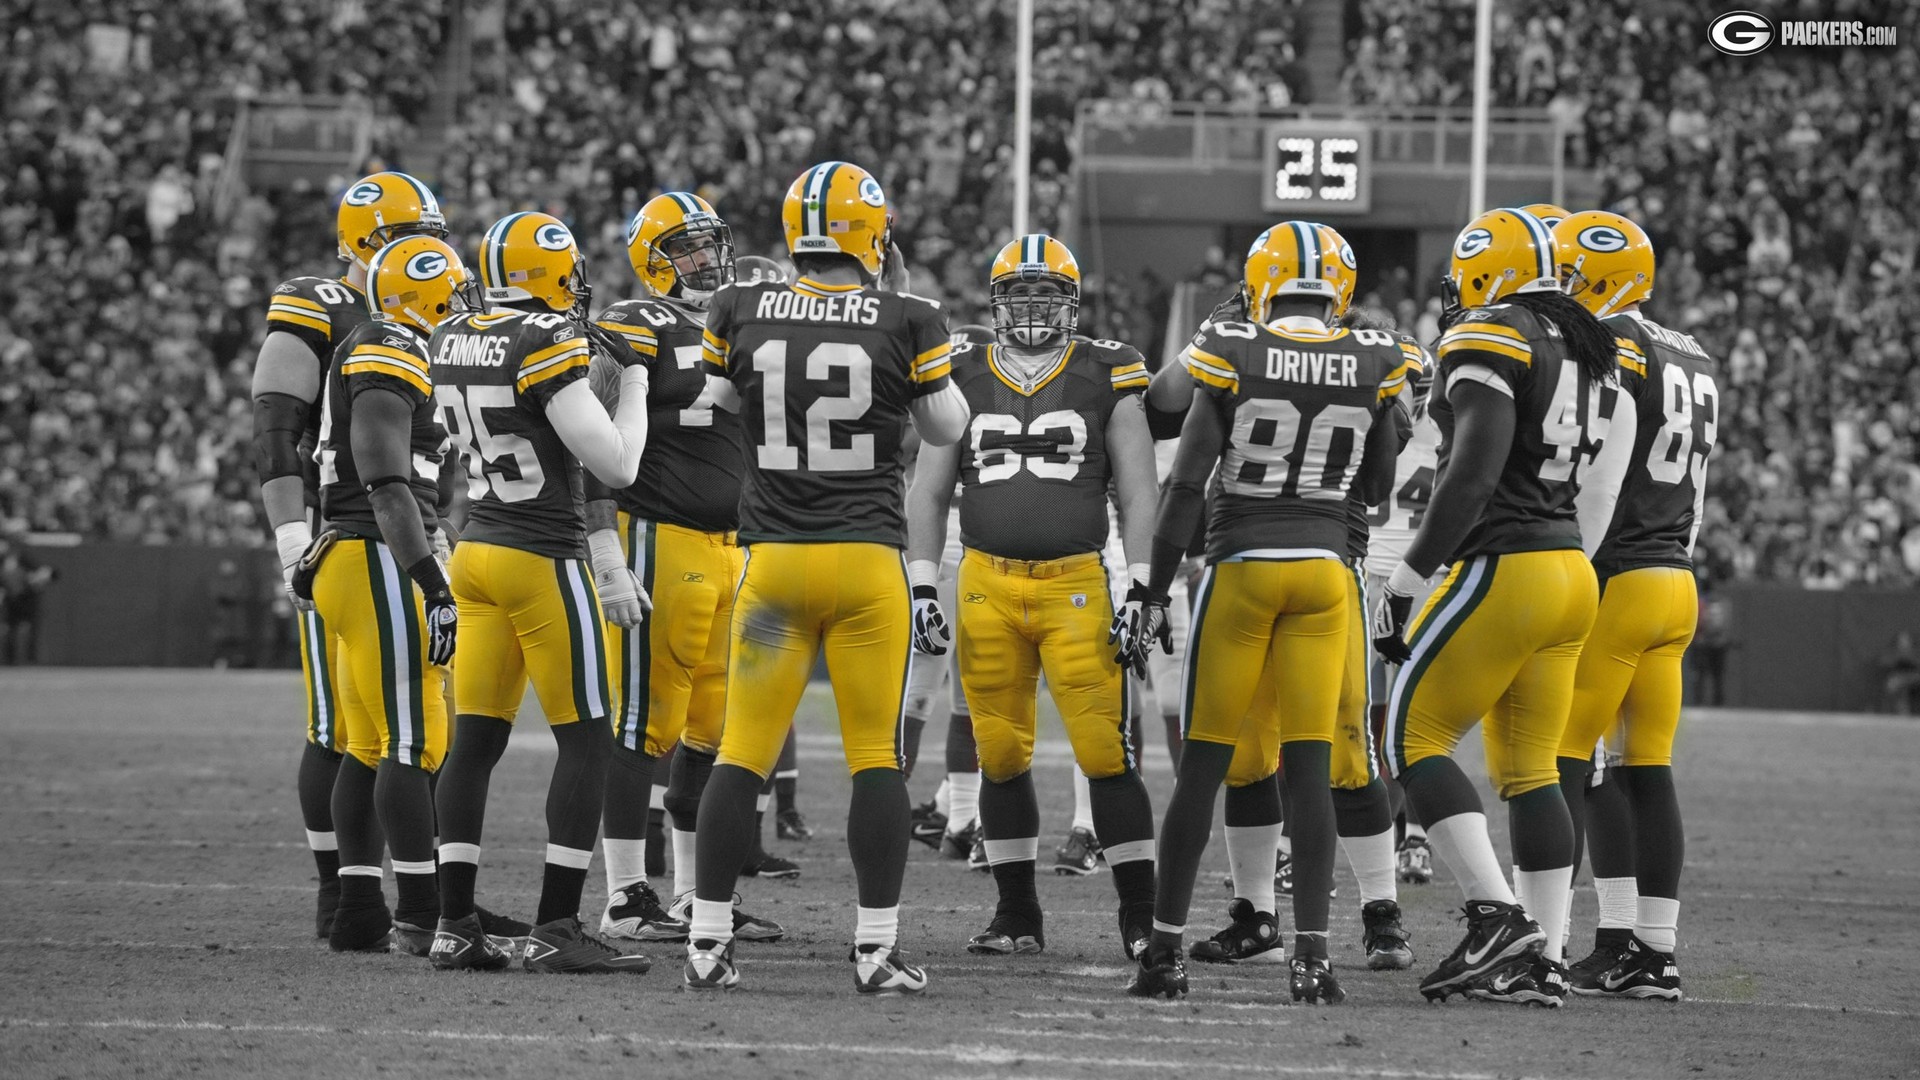 Green Bay Packers Desktop Backgrounds With high-resolution 1920X1080 pixel. Download and set as wallpaper for Desktop Computer, Apple iPhone X, XS Max, XR, 8, 7, 6, SE, iPad, Android